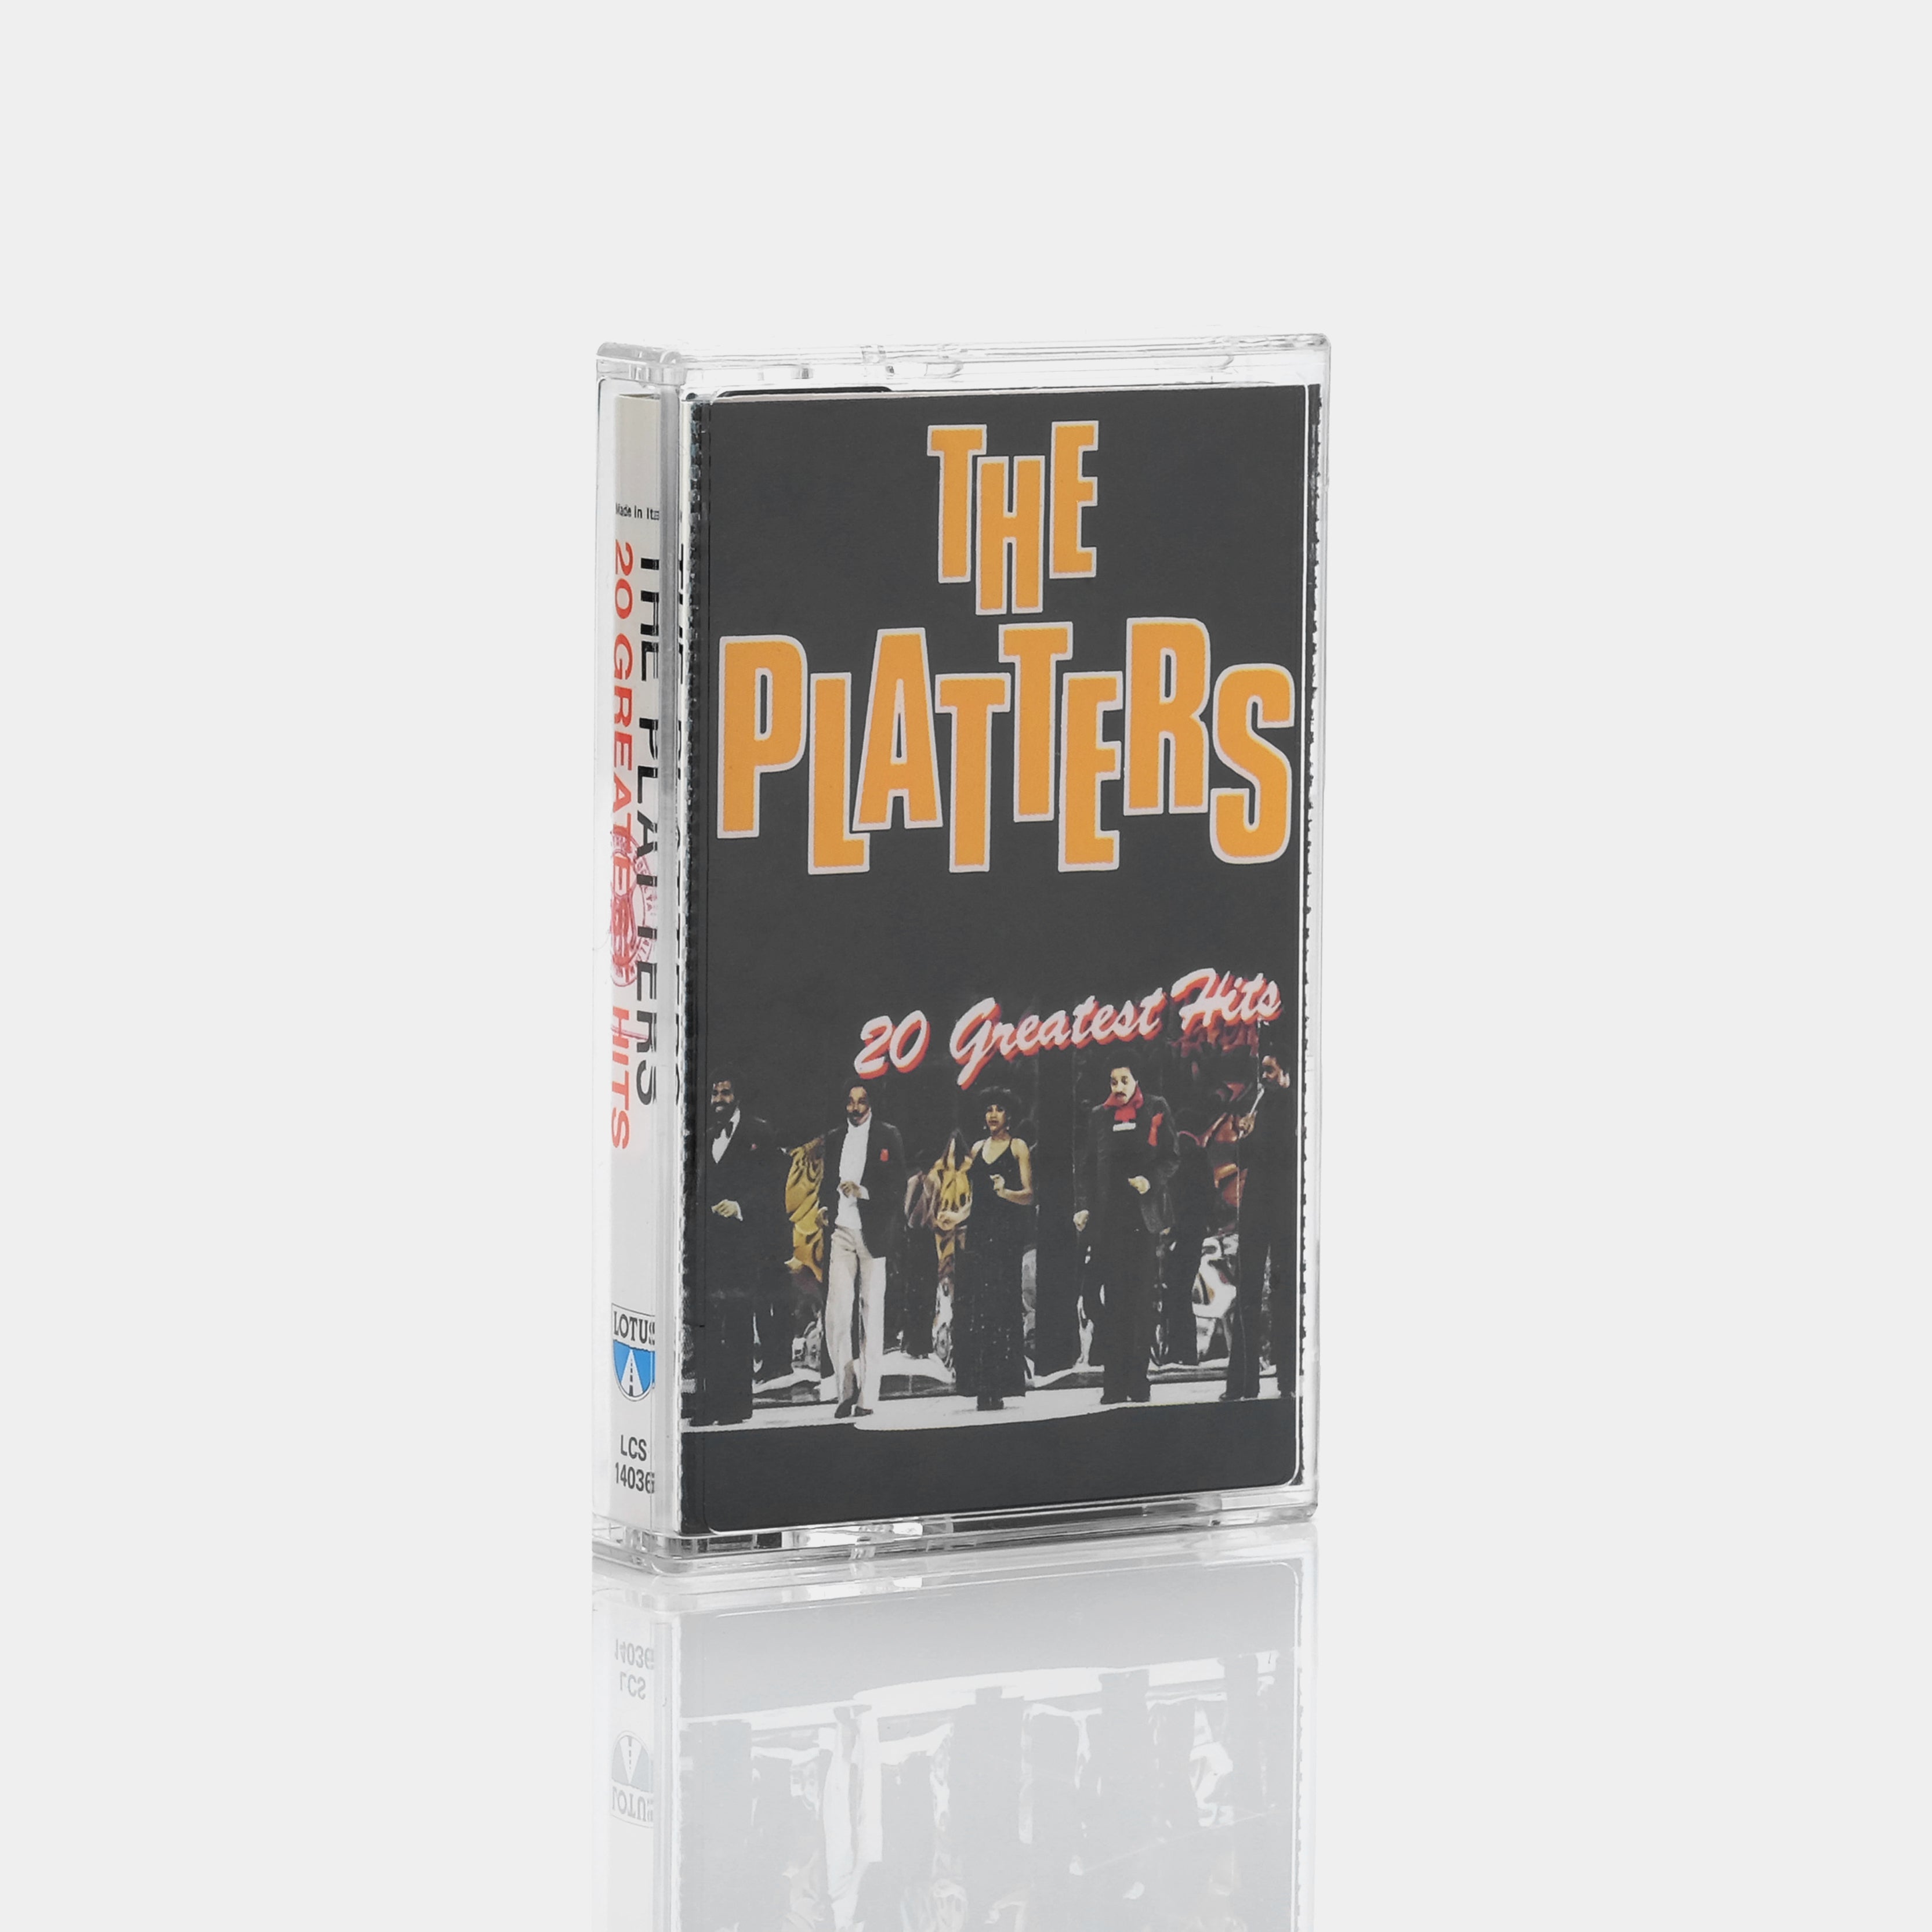 The Platters - 20 Greatest Hits Cassette Tape